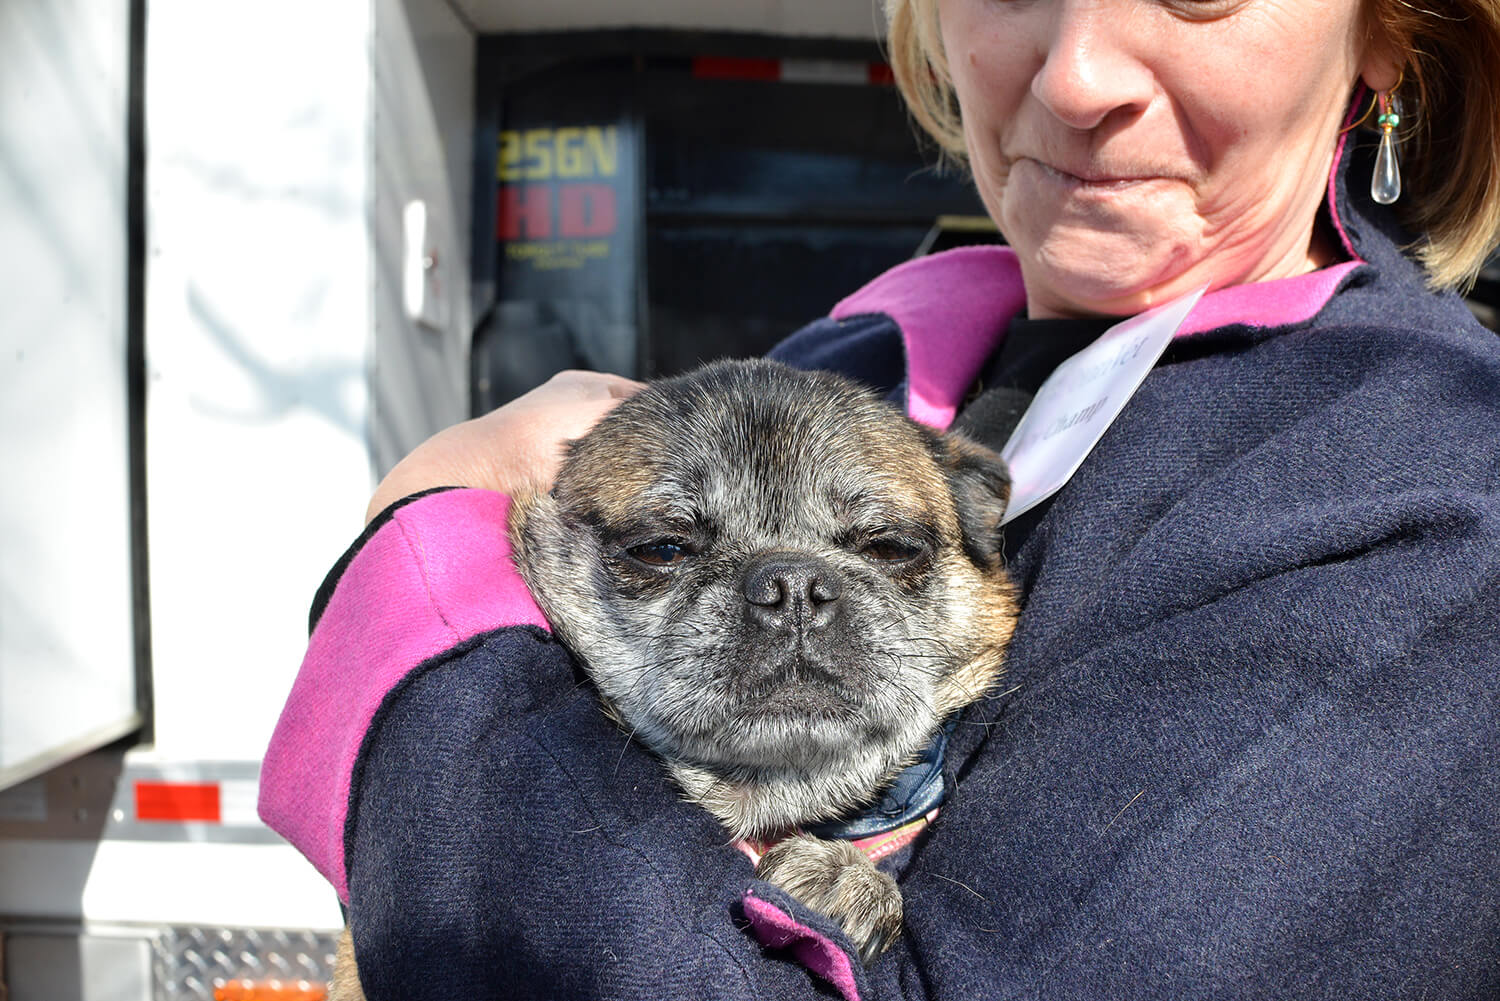 Special guests at the event included canine beneficiaries of the Shelter Medicine program, like this pug, Tupug.